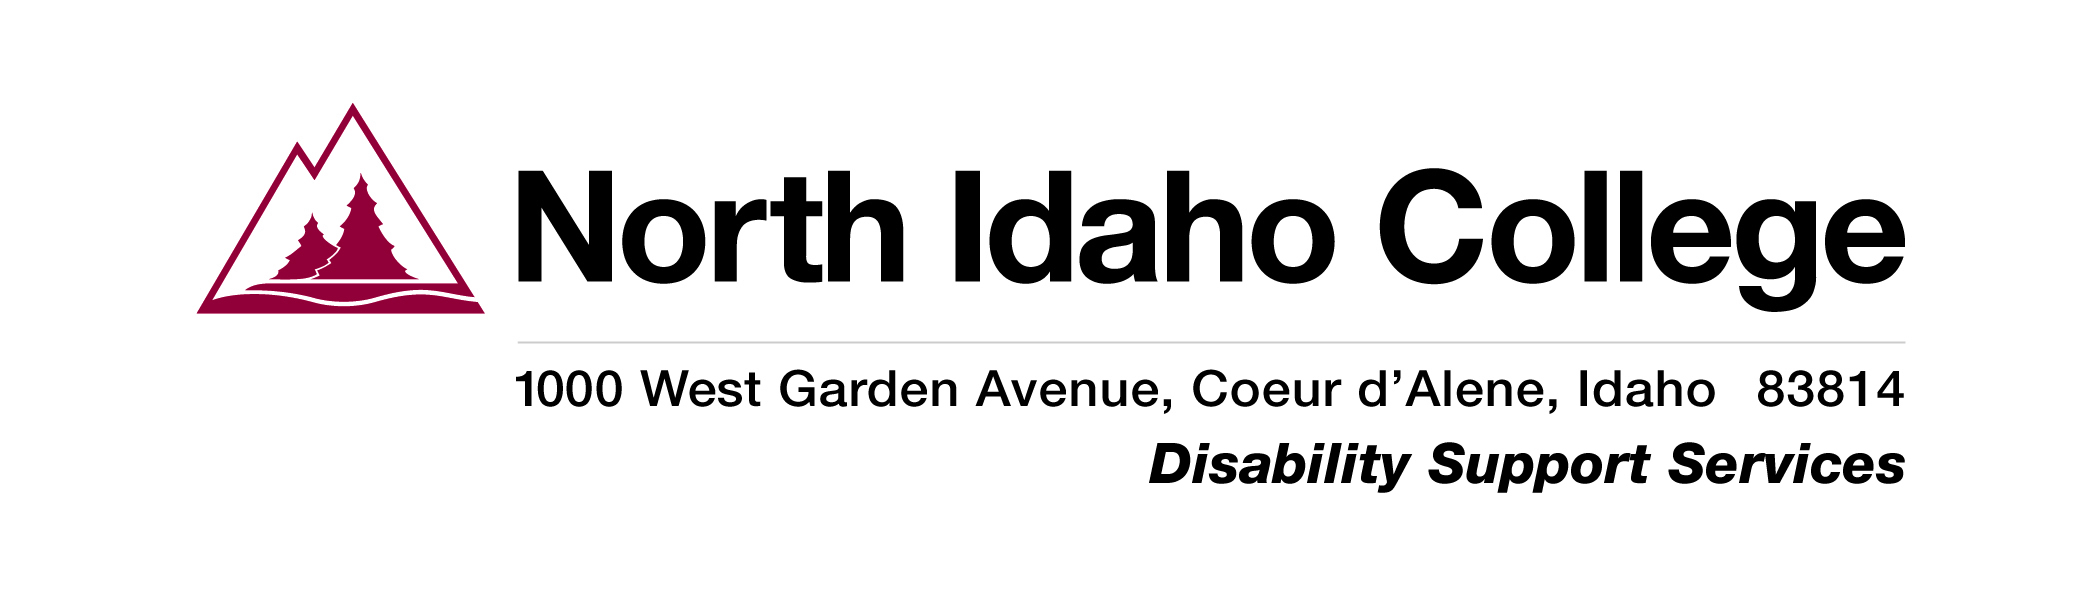 NIC Logo with Disability Support Services department and address